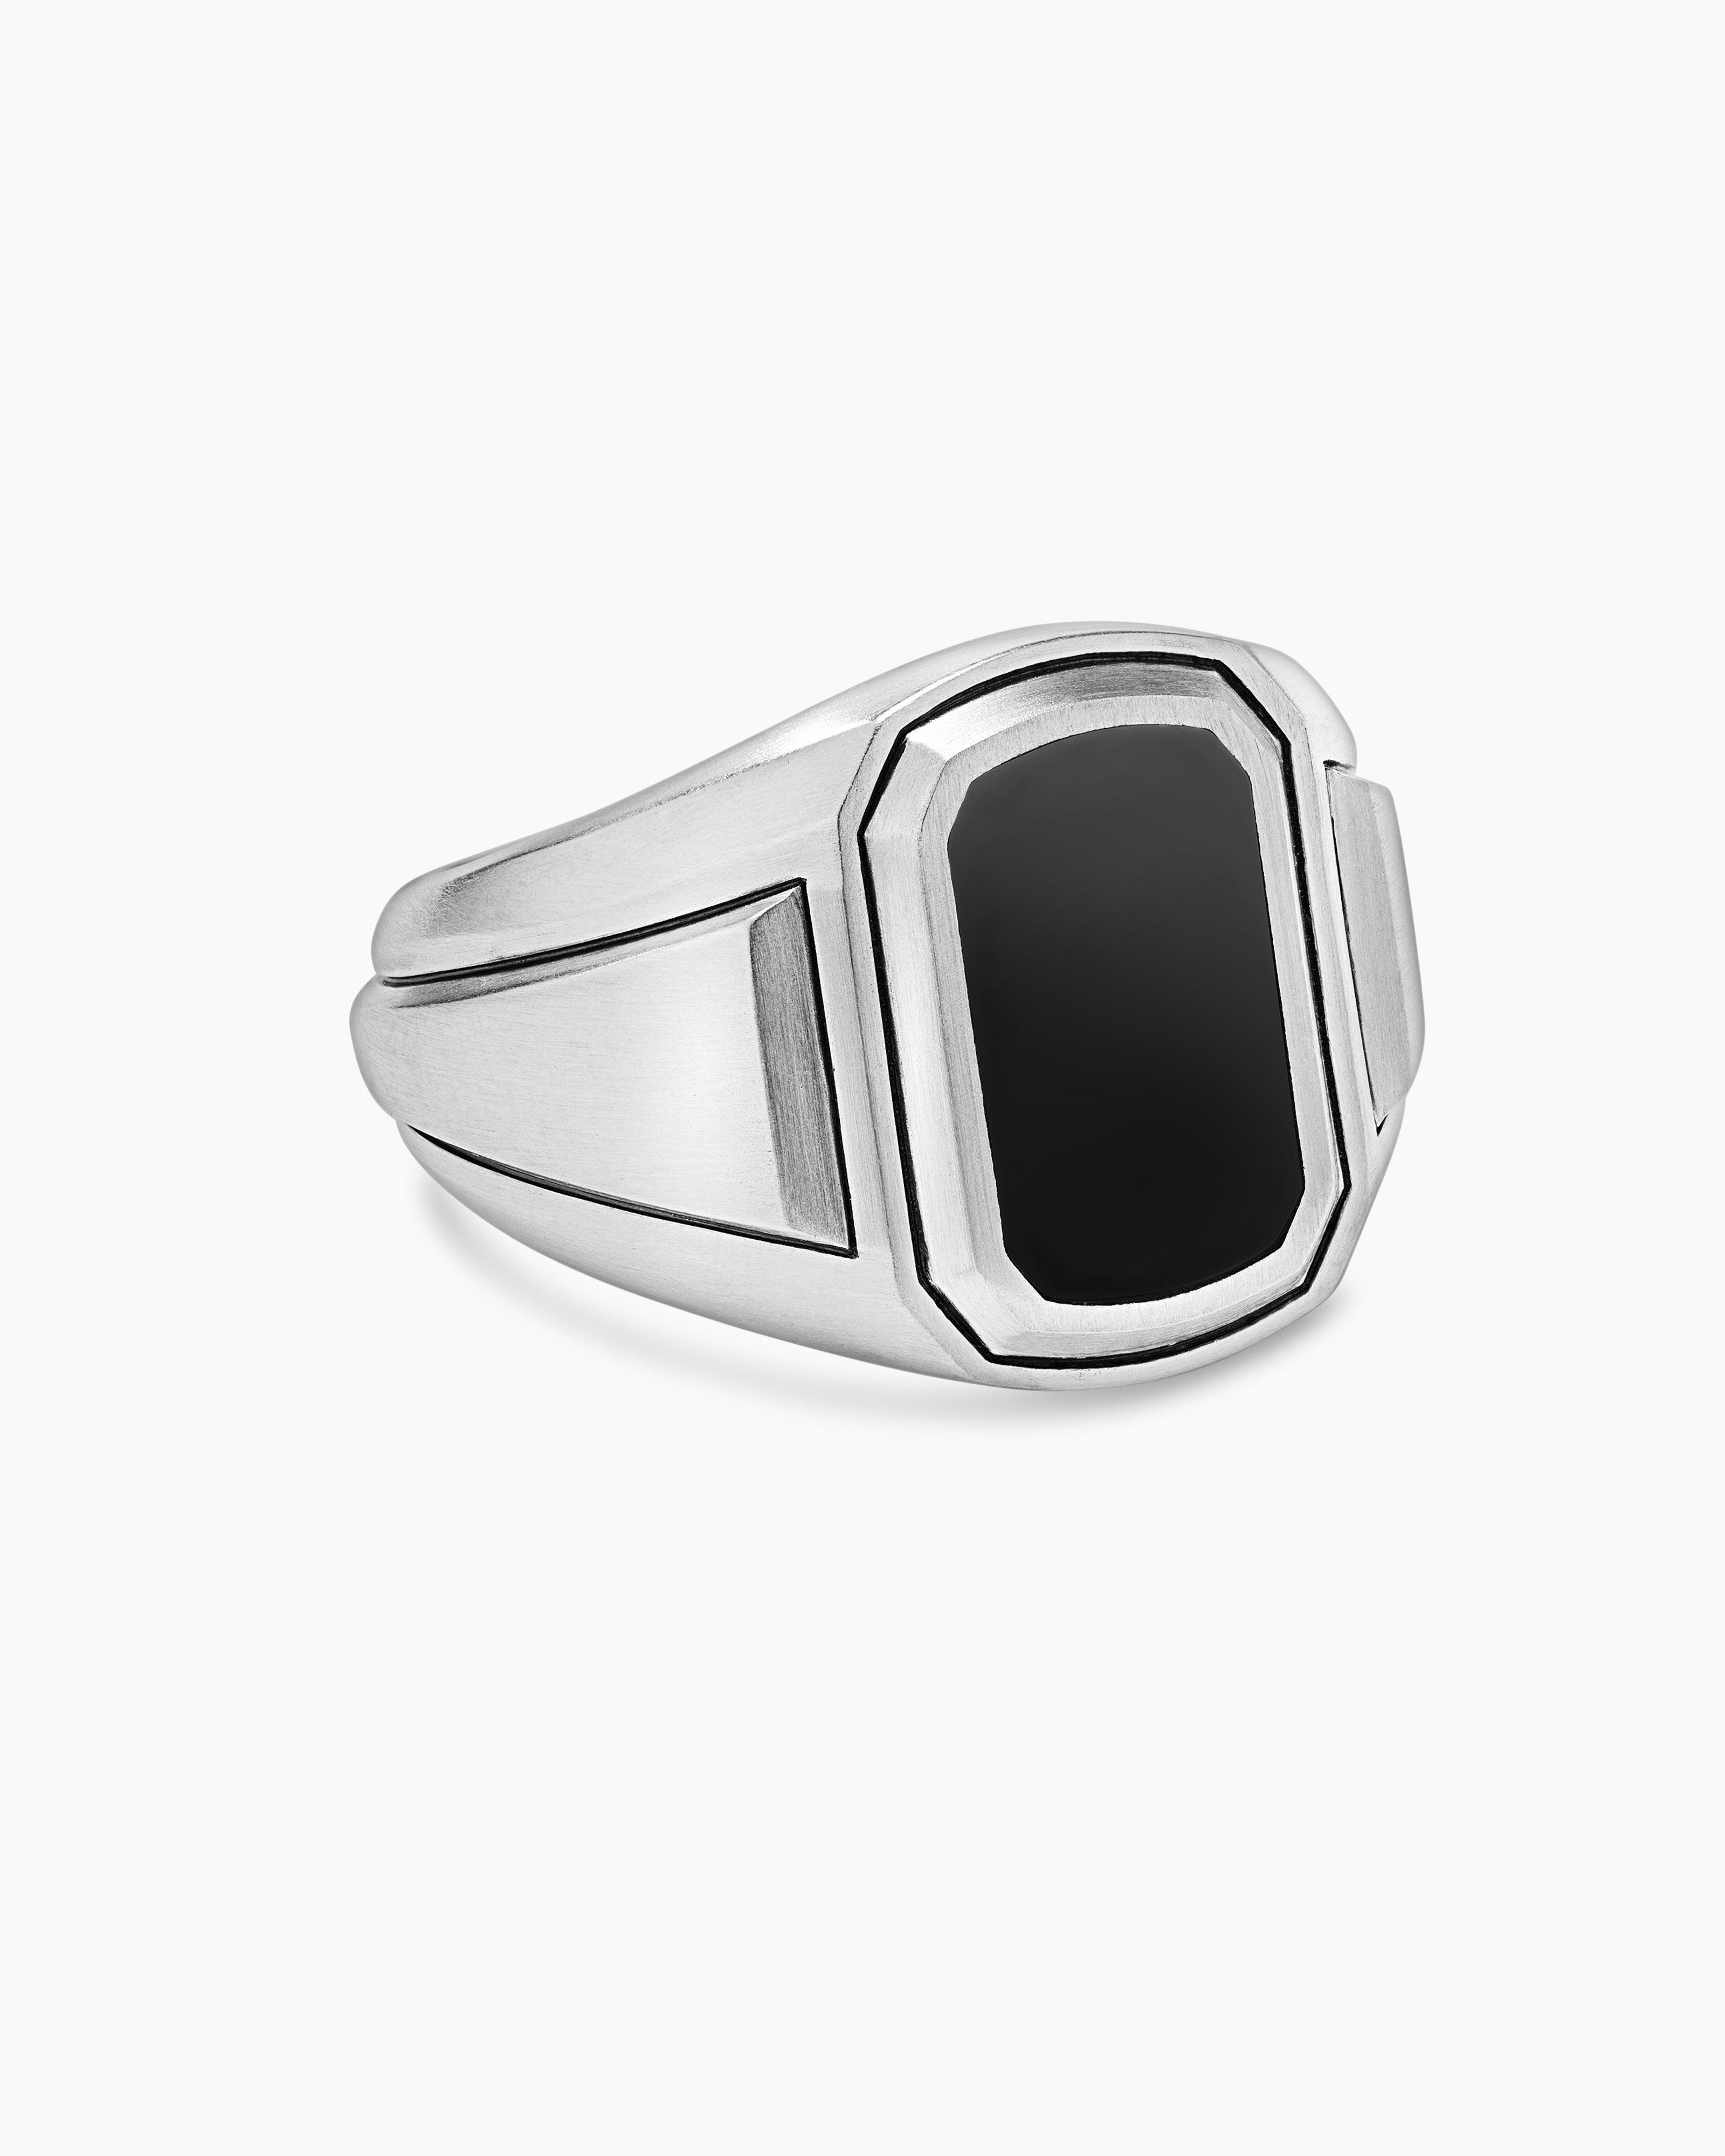 Columbia Sterling Silver Round Signet Ring - Graduation Gift Selection |  M.LaHart & Co.